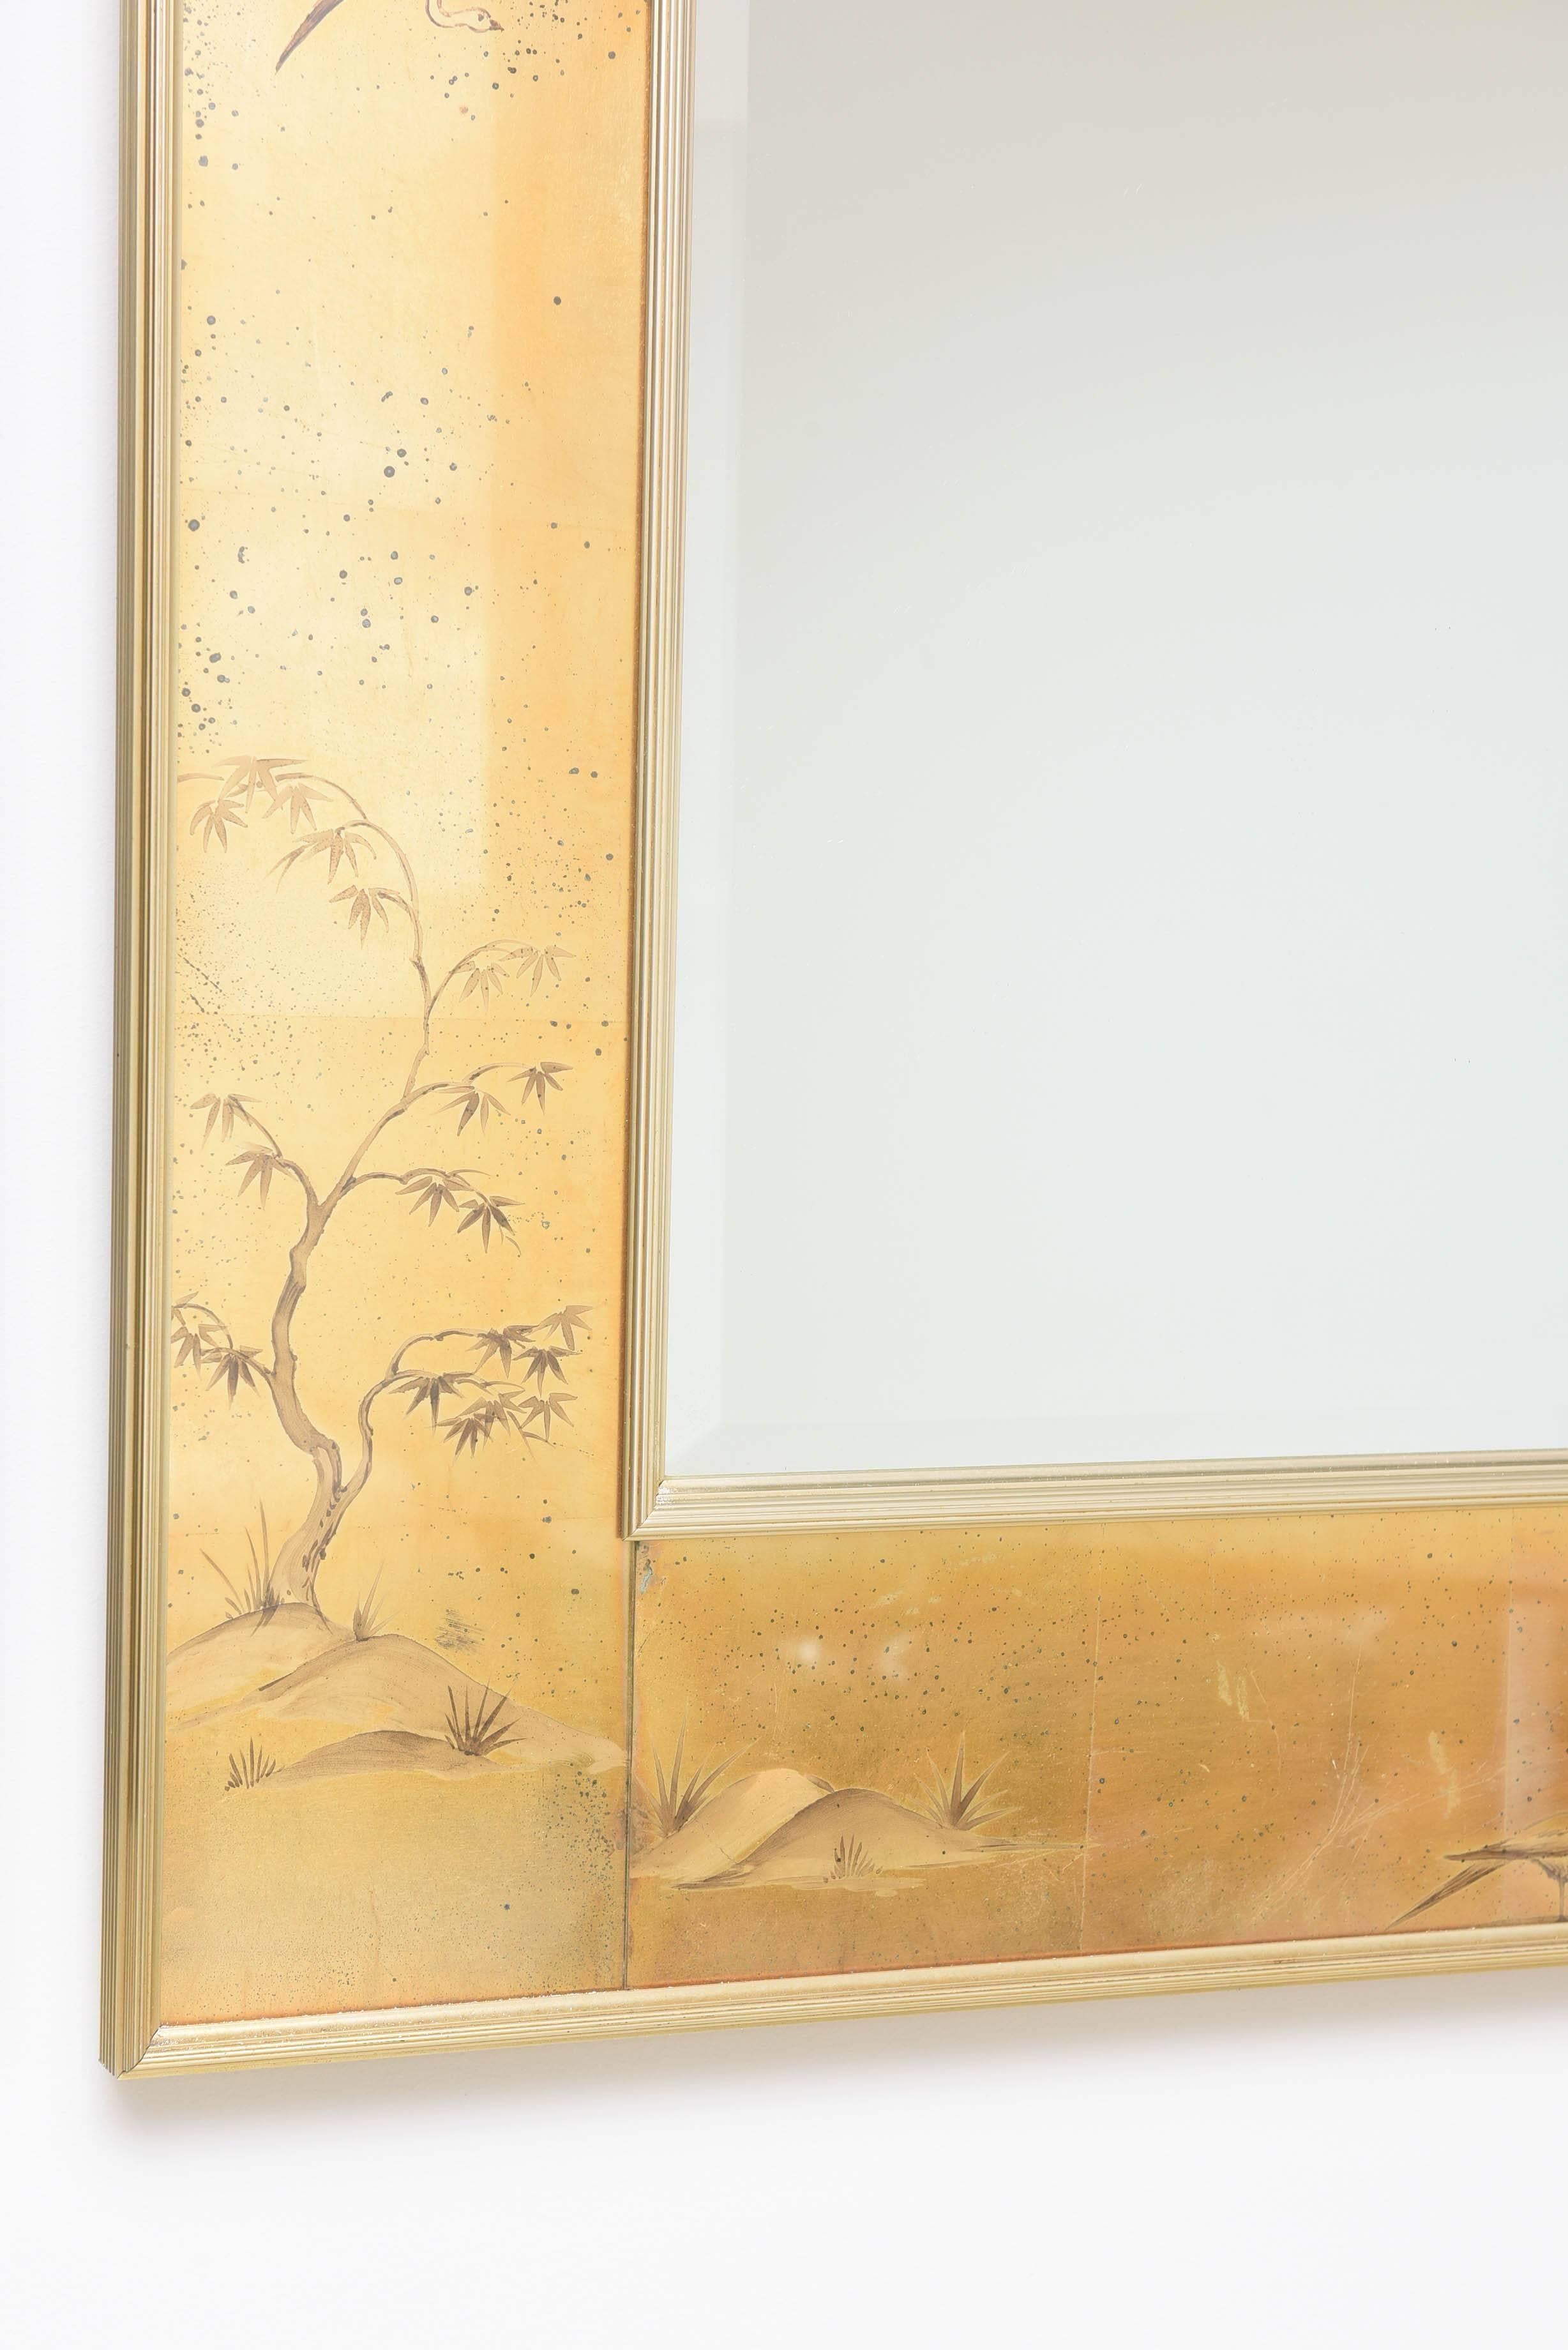 American La Barge Mirror with Églomisé Style Panels Depicting Chinoiserie Scenes in Gold